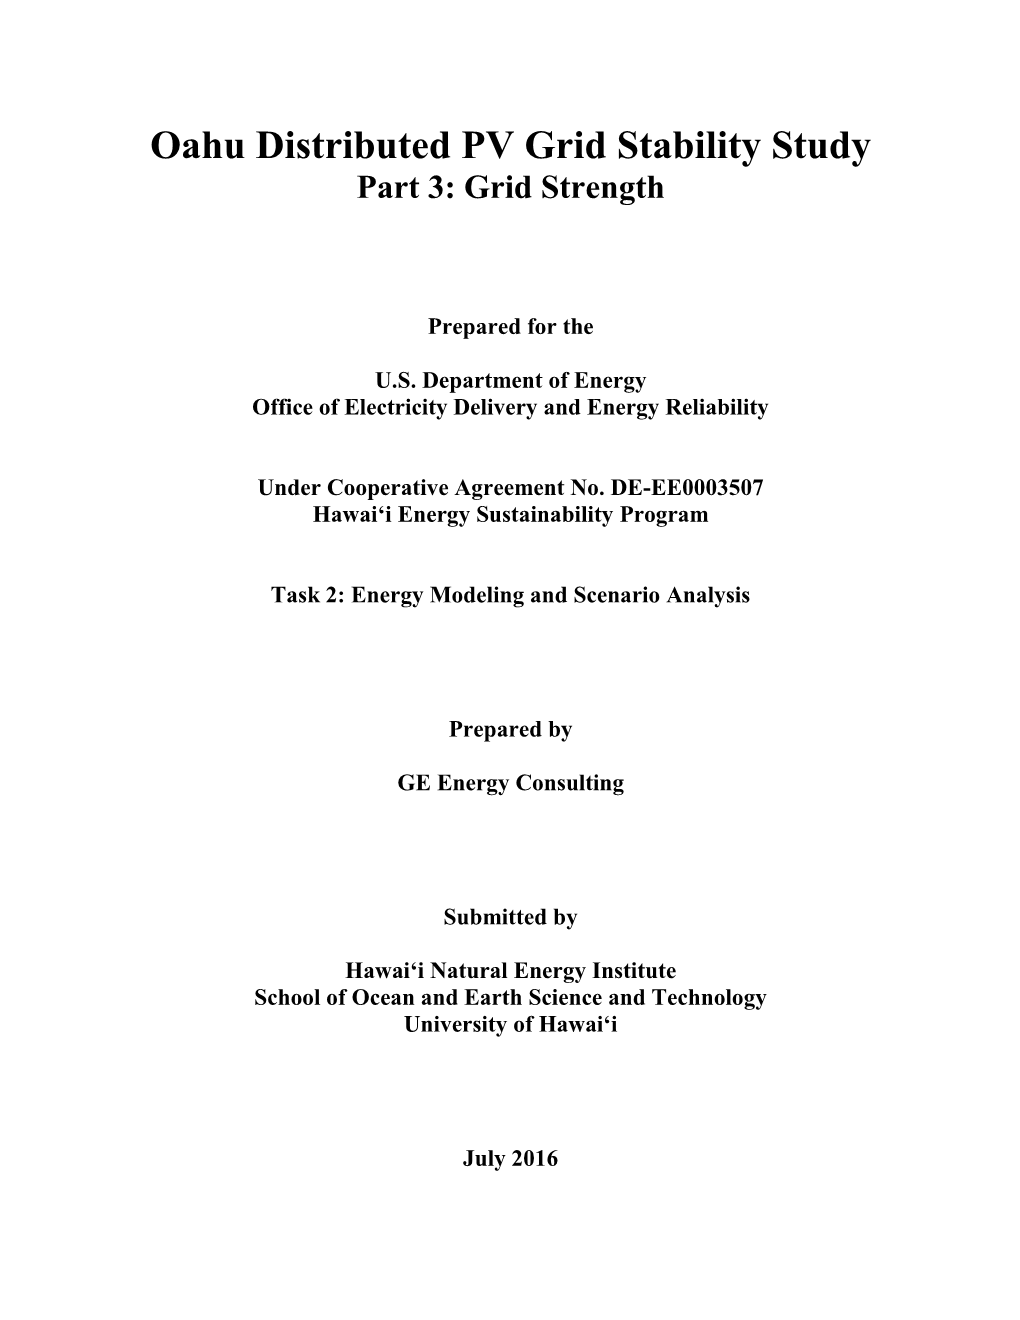 Oahu Distributed PV Grid Stability Study, Part 3